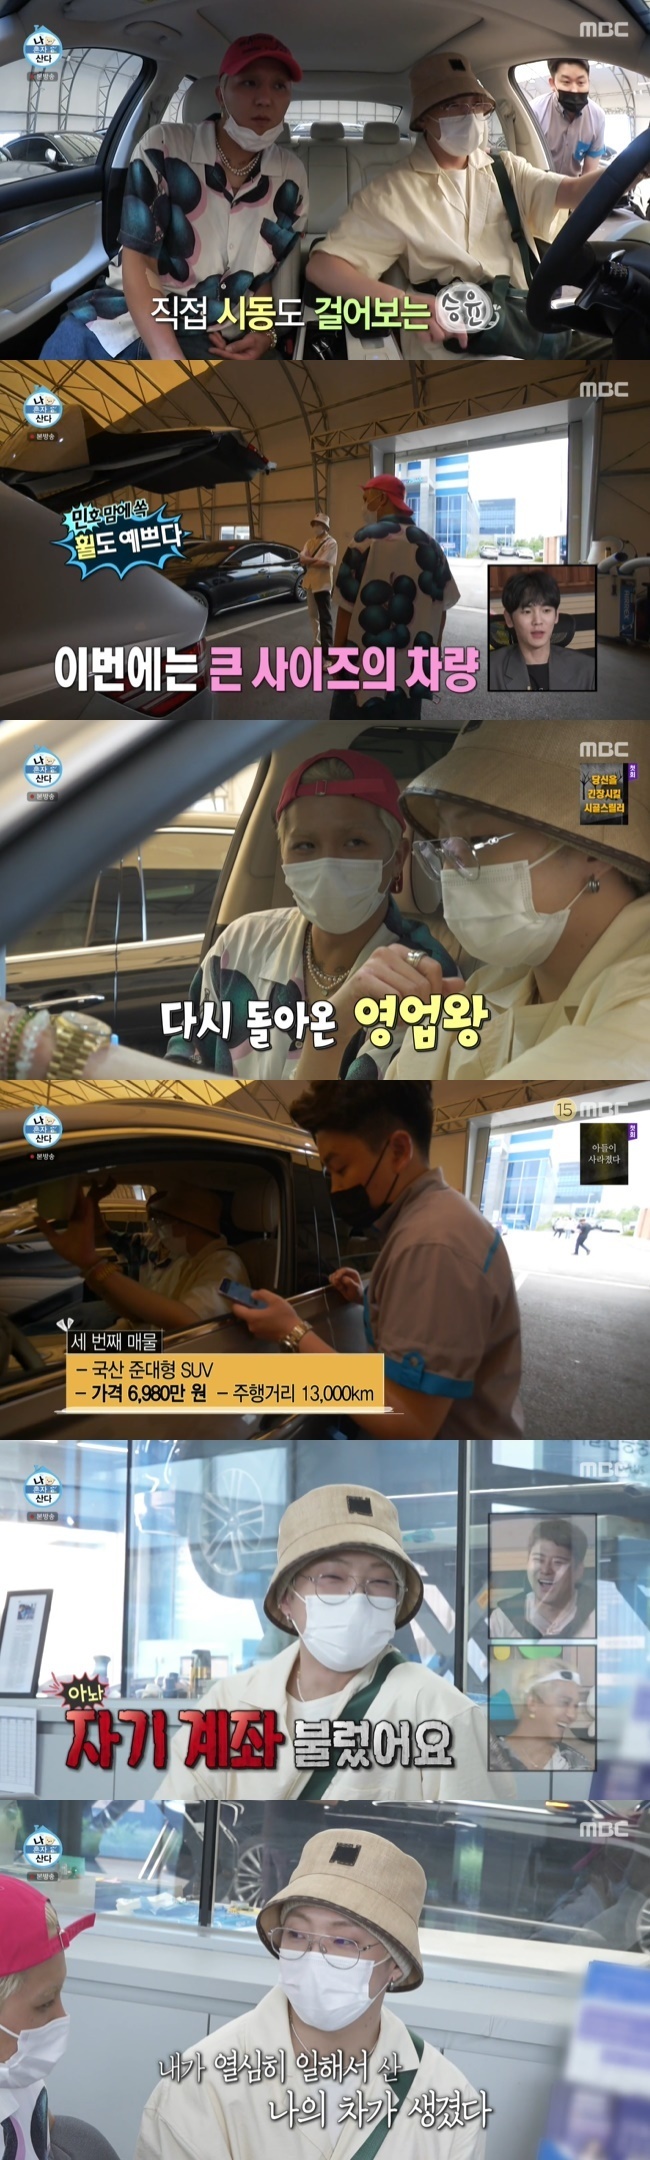 Kang Seung-yoon was thrilled to buy his first car of his lifeOn MBC I Live Alone broadcast on July 29, Kang Seung-yoon visited the Used car store with Song Min-ho.Kang Seung-yoon took Song Min-hos The Classic Open car to the Used Car store.Song Min-ho said, I went to buy Seung-yoons first car, Kang Seung-yoon changed her mothers car Kang Seung-yoon was riding in it.Its not long since Seung-yoon drove. The first car is a used car.Kang Seung-yoon cited the new model, which is not old enough for the use car sales staff, the mid-sized or larger size for putting a puppy seat in the back seat, and the vehicle that matches his image.Kang Seung-yoon looked at domestic brand semi-large sedan, German brand semi-large sedan, and domestic brand semi-large SUV in turn.Song Min-ho, who likes camping, actively operated SUVs to Kang Seung-yoon, and Kang Seung-yoon decided to buy SUVs coolly after even driving directly.Song Min-ho explained, Before I went to the Kang Seung-yoon, I decided to buy a lot of it and I decided to buy it almost.The documentation was carried out in a single way, and Kang Seung-yoon prepared to transfer the money directly from the spot.Song Min-ho said he would call his deposit account number and called his account and laughed.Hey, you are The Swindlers, he said, Minho will not starve to death.Kang Seung-yoon remitted 61.8 million won and finished purchasing the car.Kang Seung-yoon said, I have my car now that I have worked hard and bought it. I am going to have this day for me.Song Min-ho congratulated him, saying, I have worked hard for over 10 years.